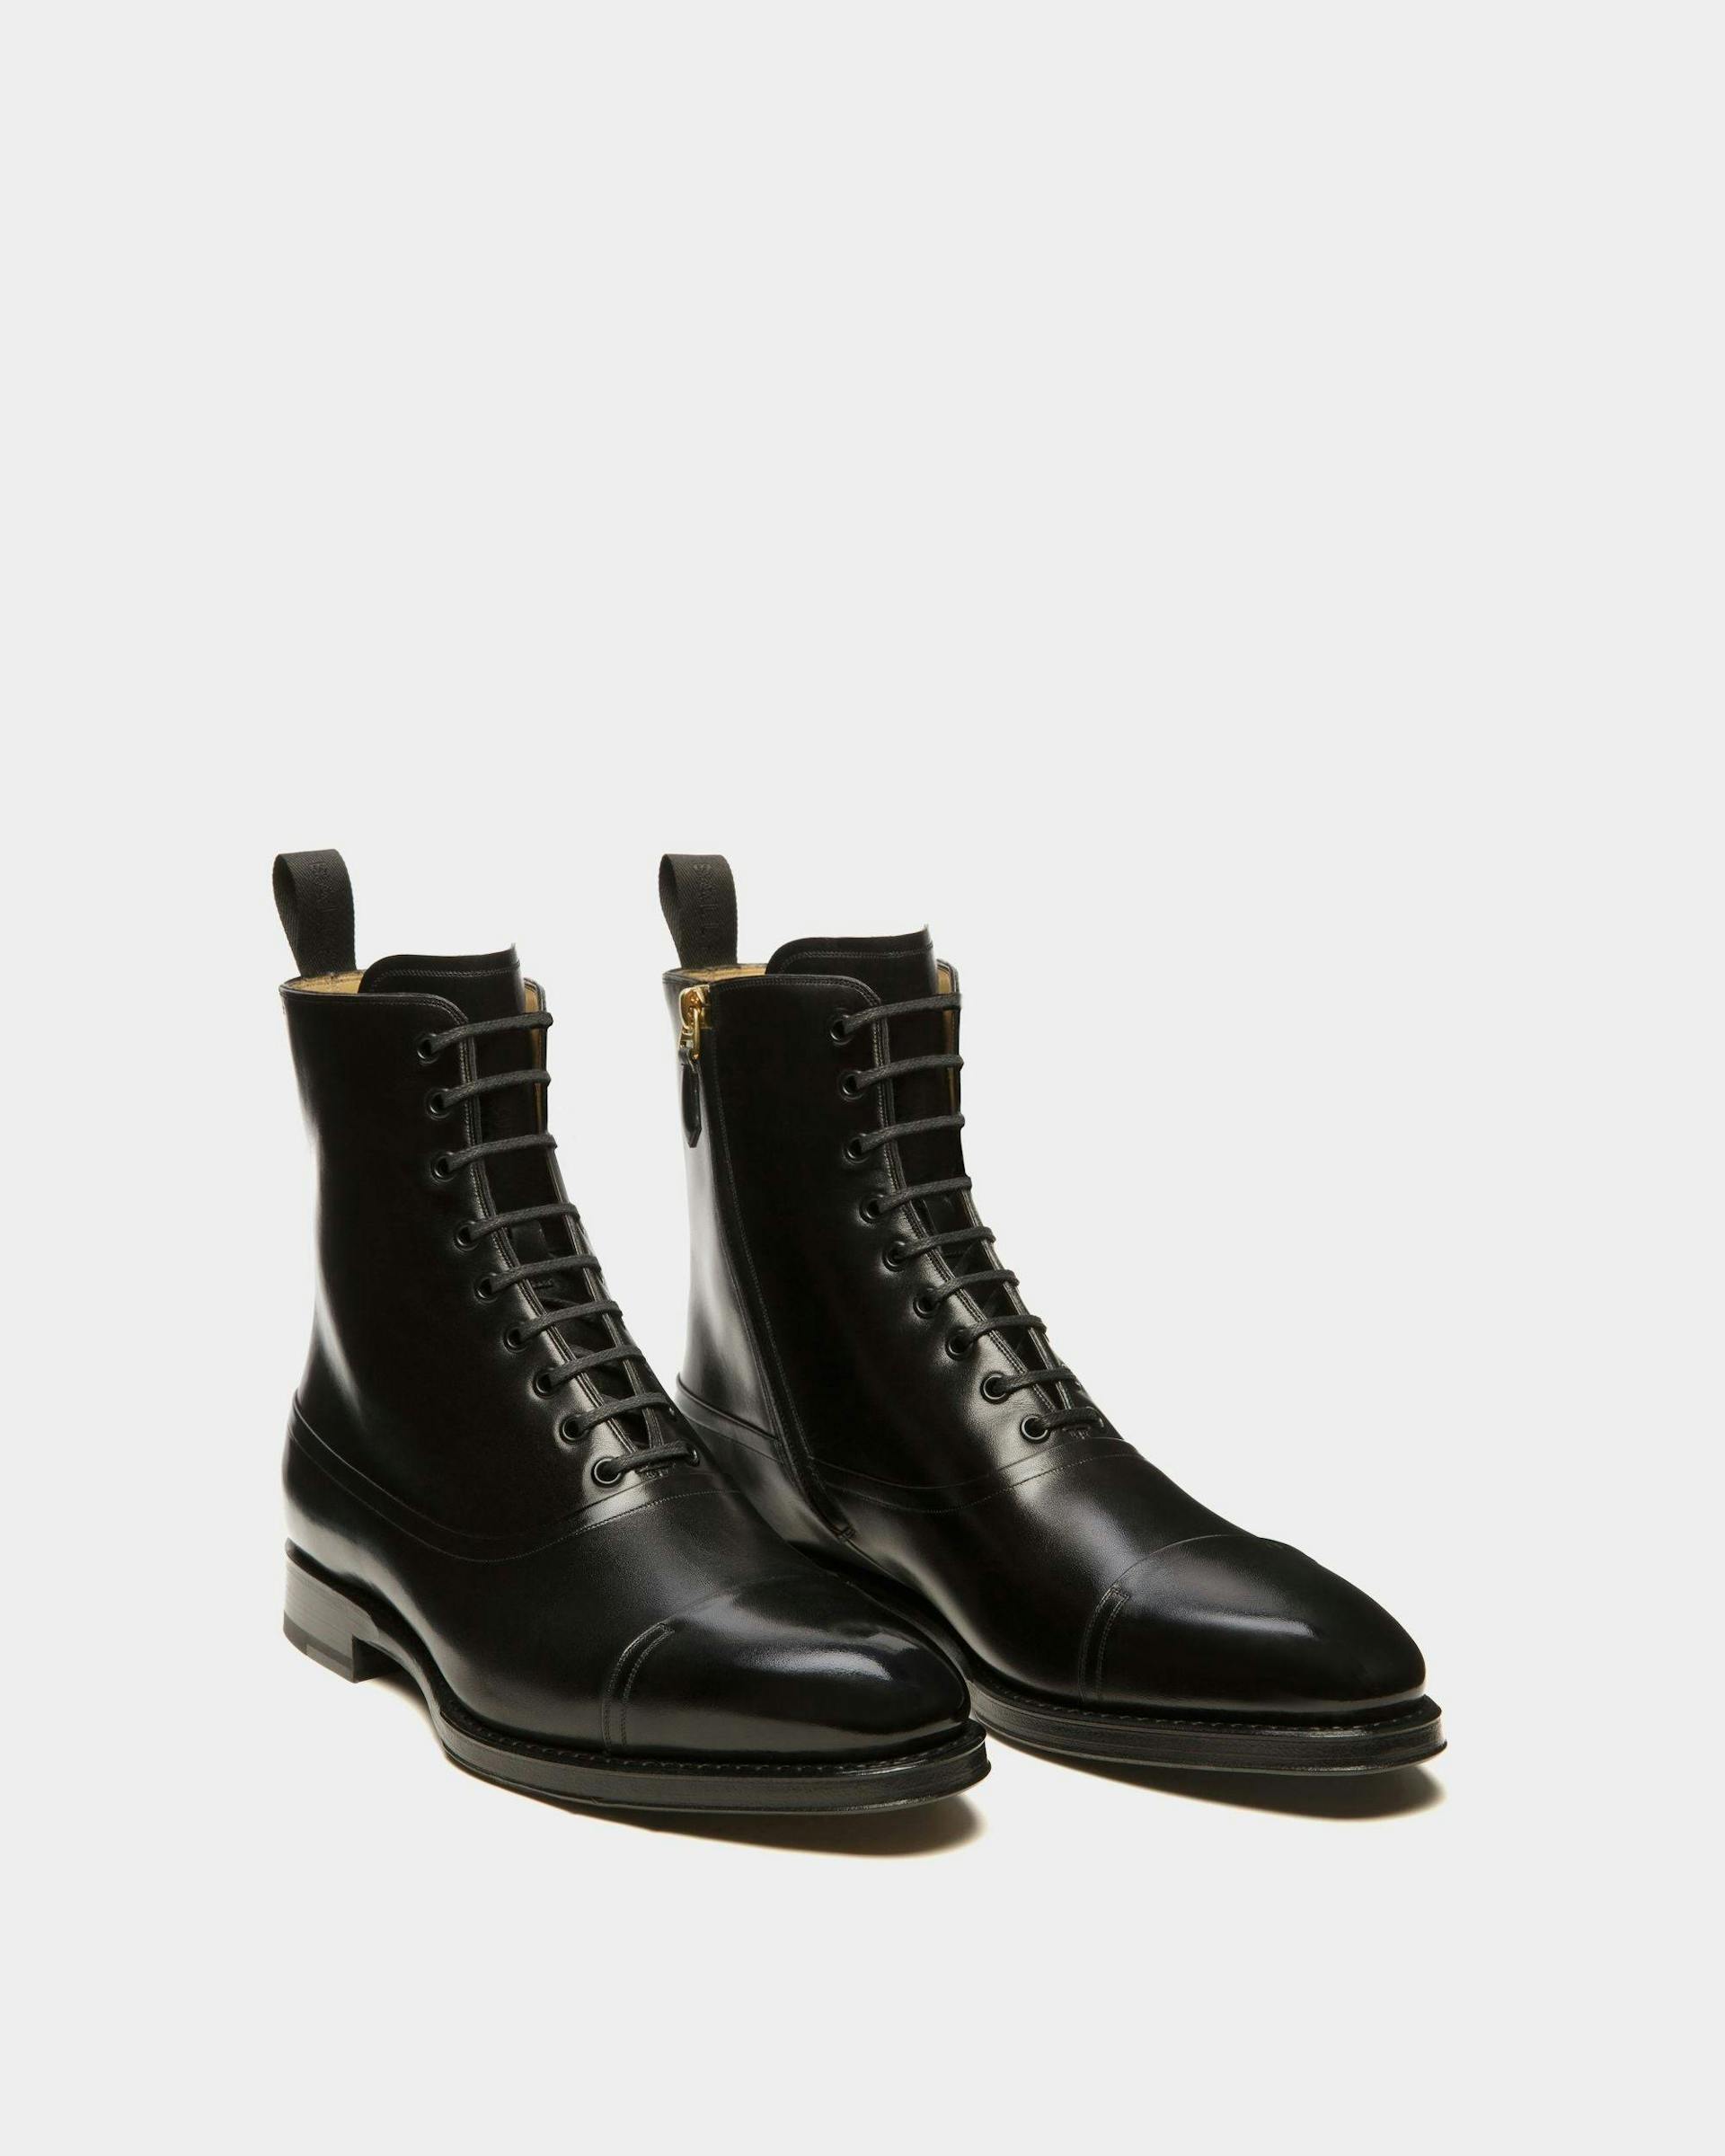 Men's Scribe Booties In Black Leather | Bally | Still Life 3/4 Front